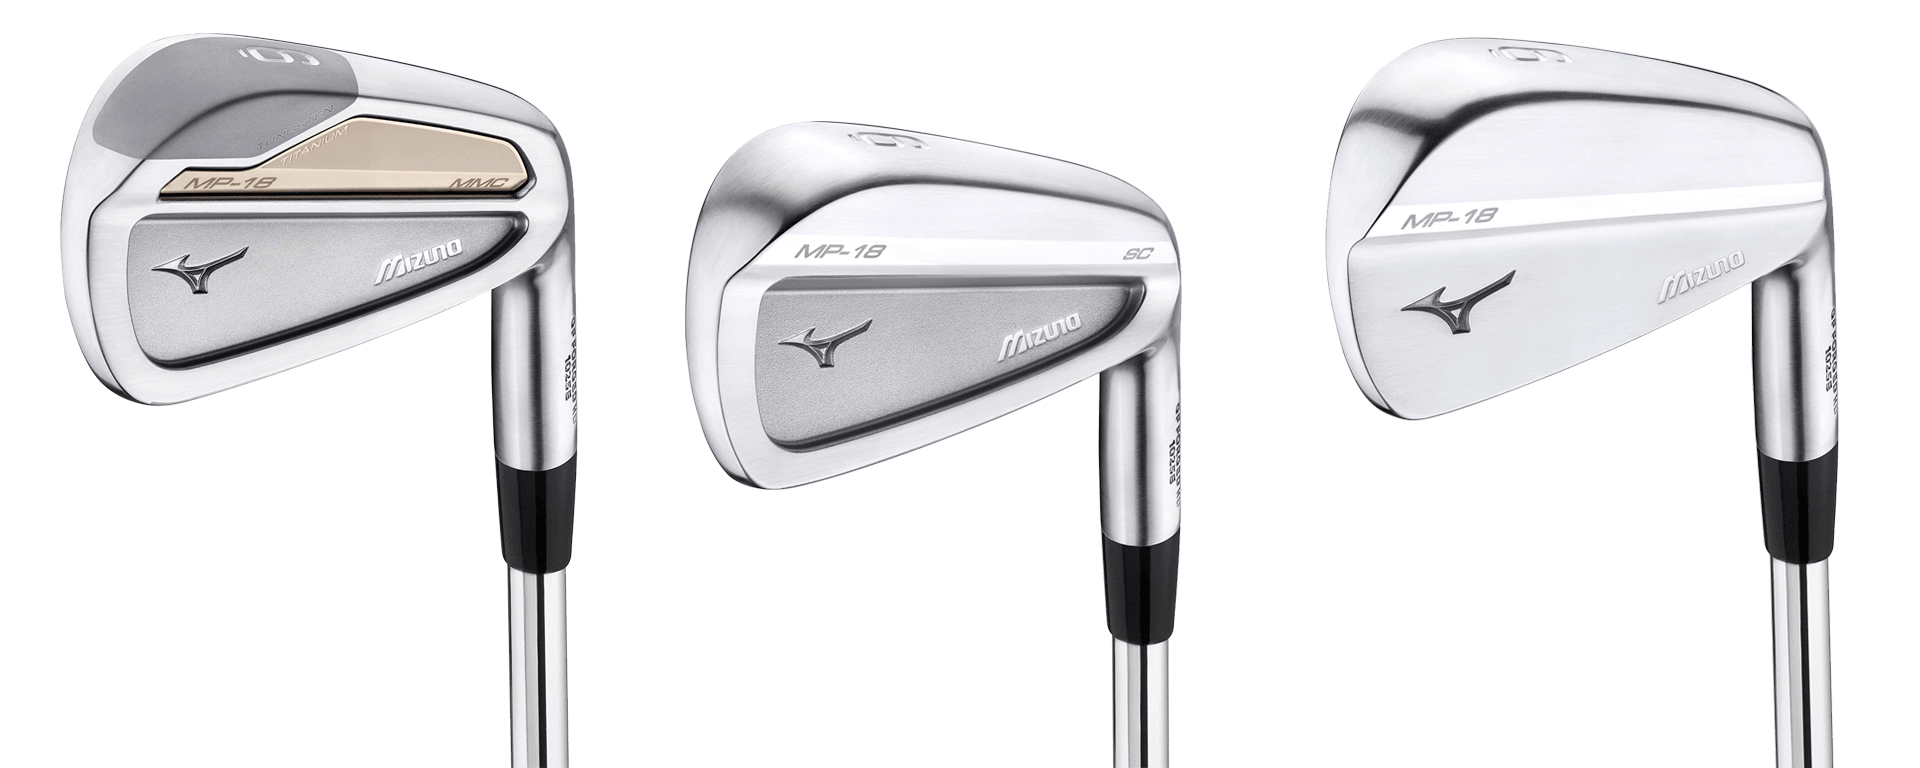 New Clubs for 2017